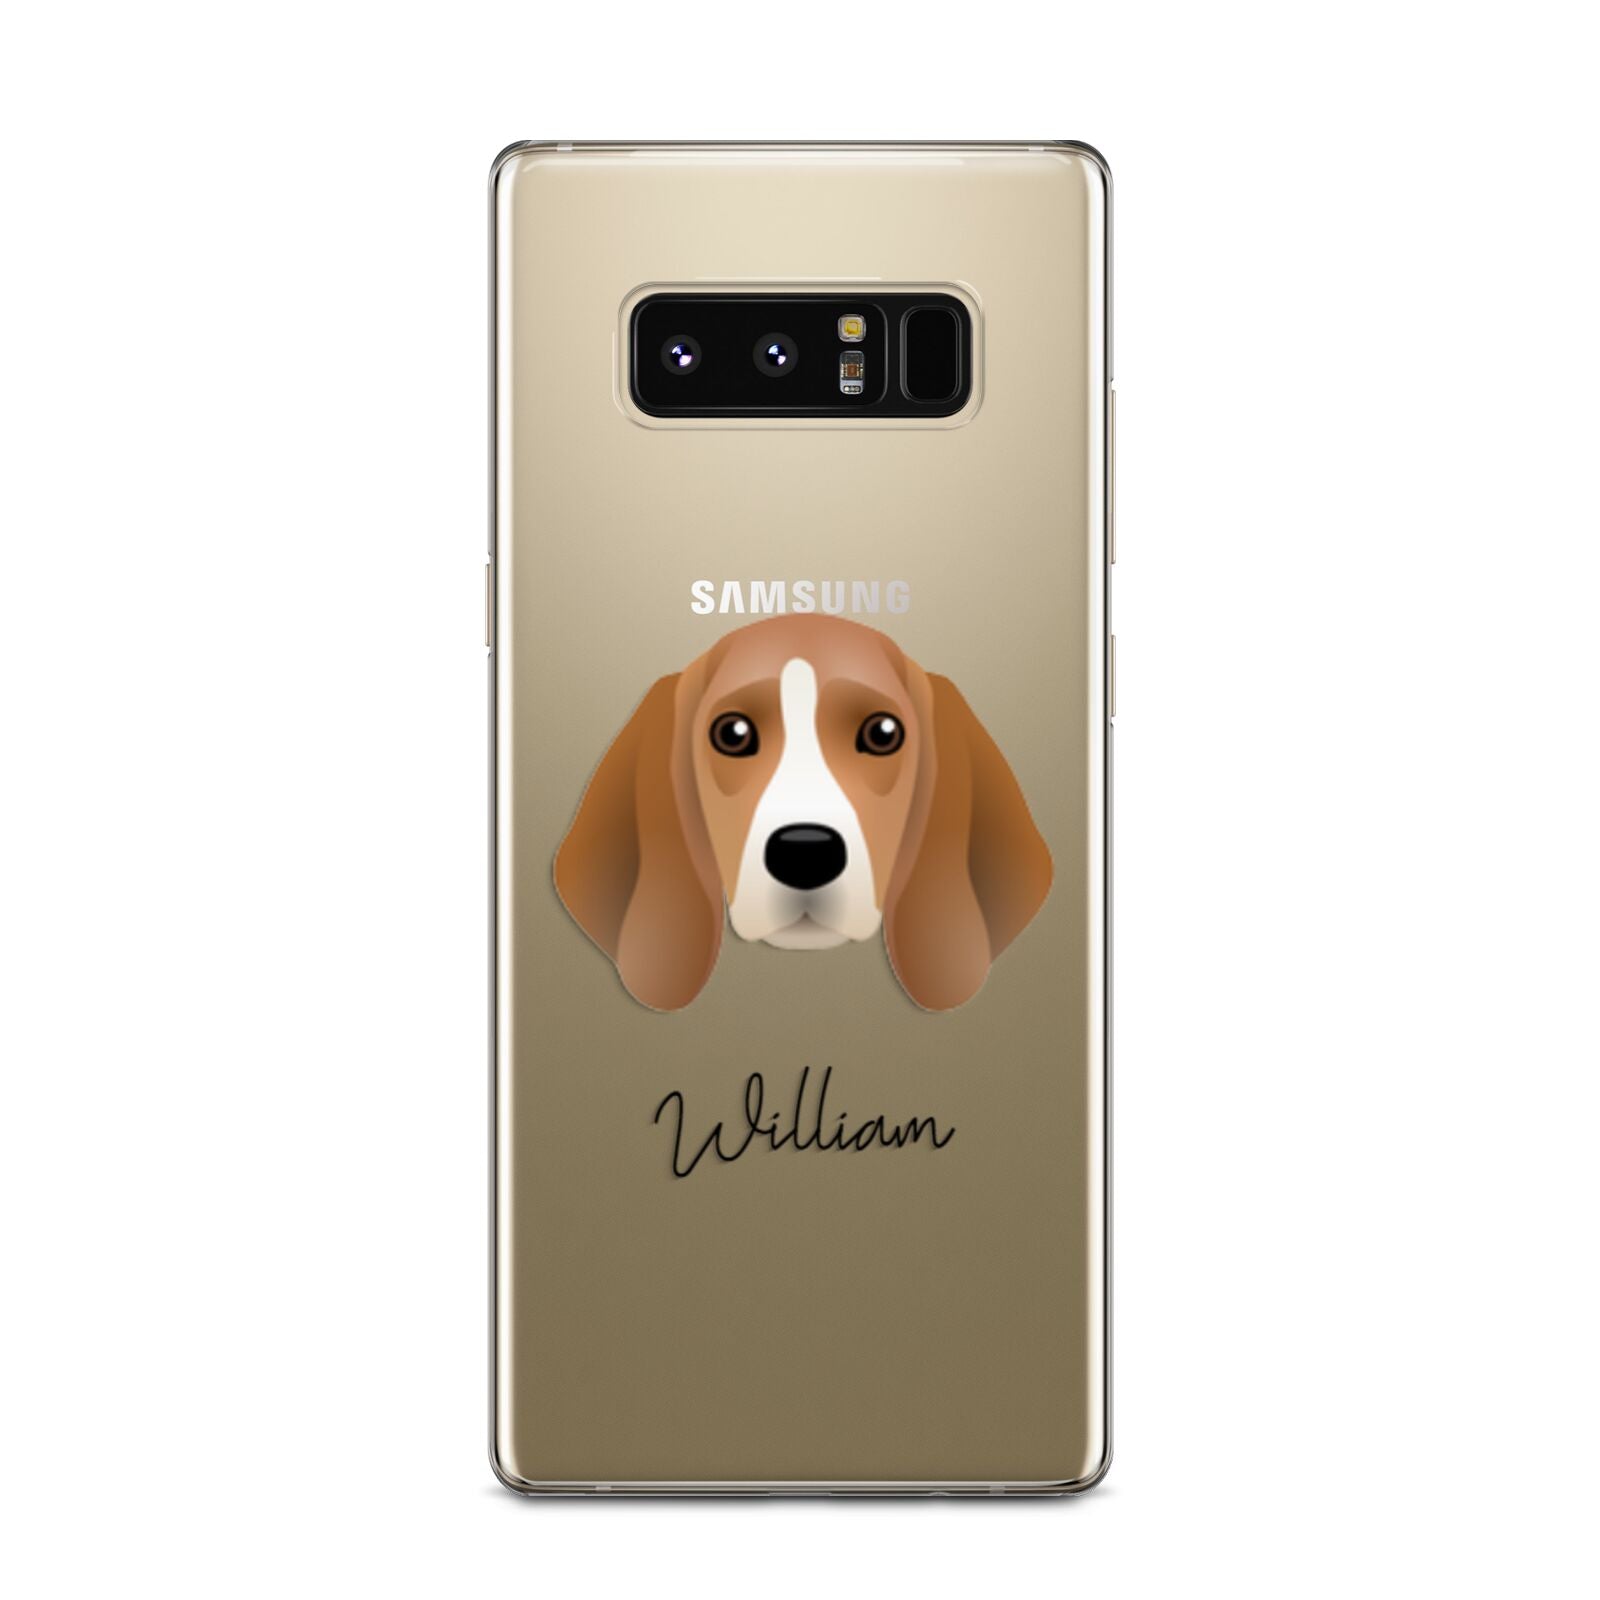 Beagle Personalised Samsung Galaxy Note 8 Case